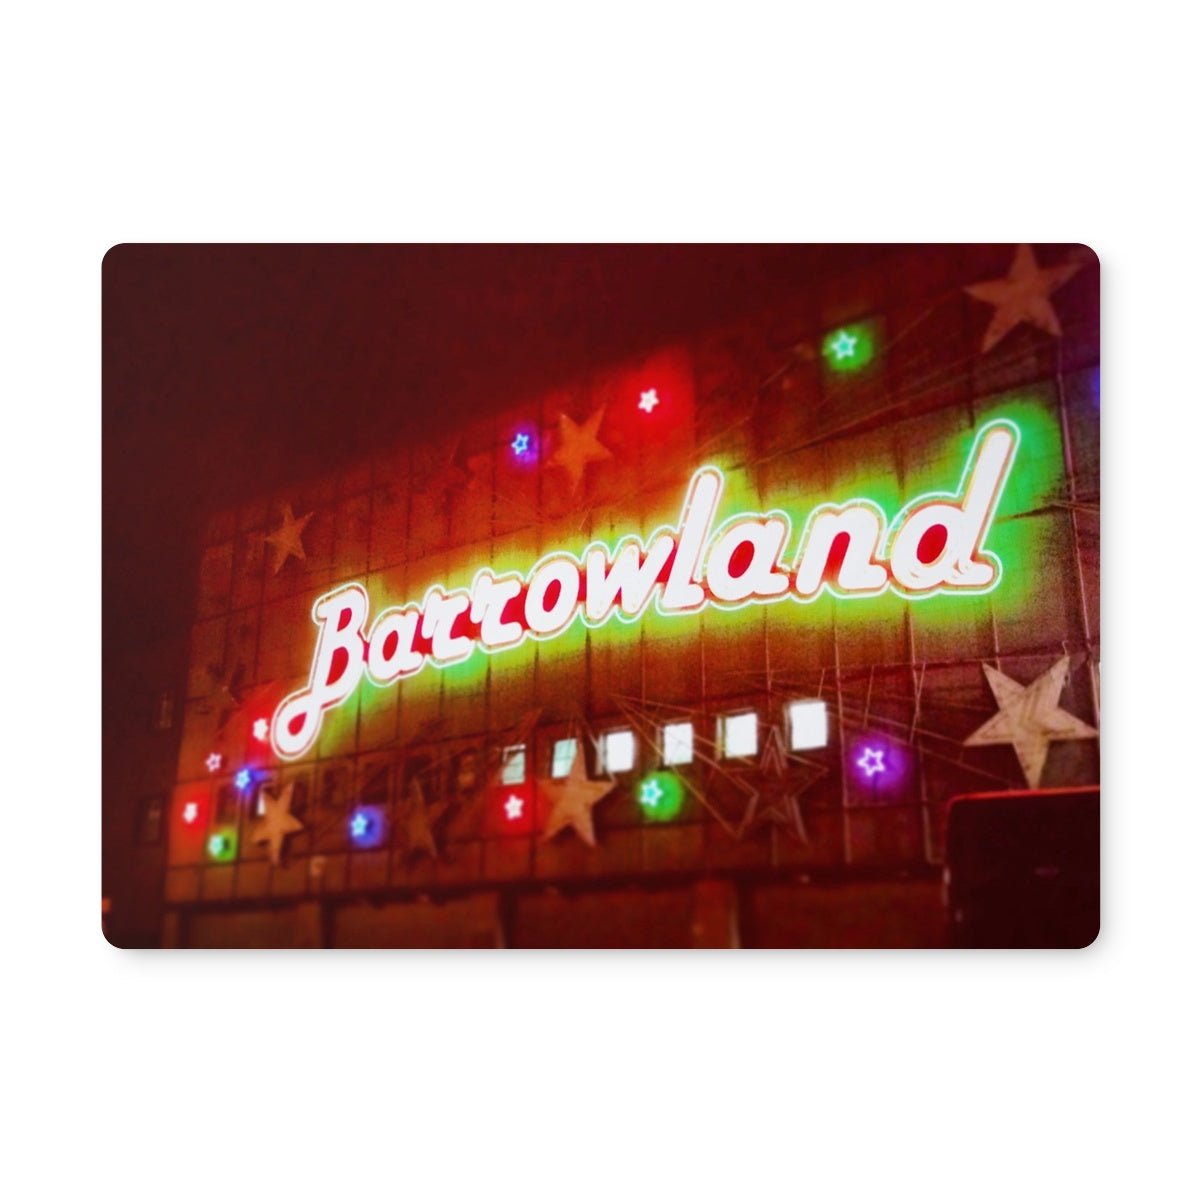 A Neon Glasgow Barrowlands Art Gifts Placemat-Placemats-Edinburgh & Glasgow Art Gallery-2 Placemats-Paintings, Prints, Homeware, Art Gifts From Scotland By Scottish Artist Kevin Hunter